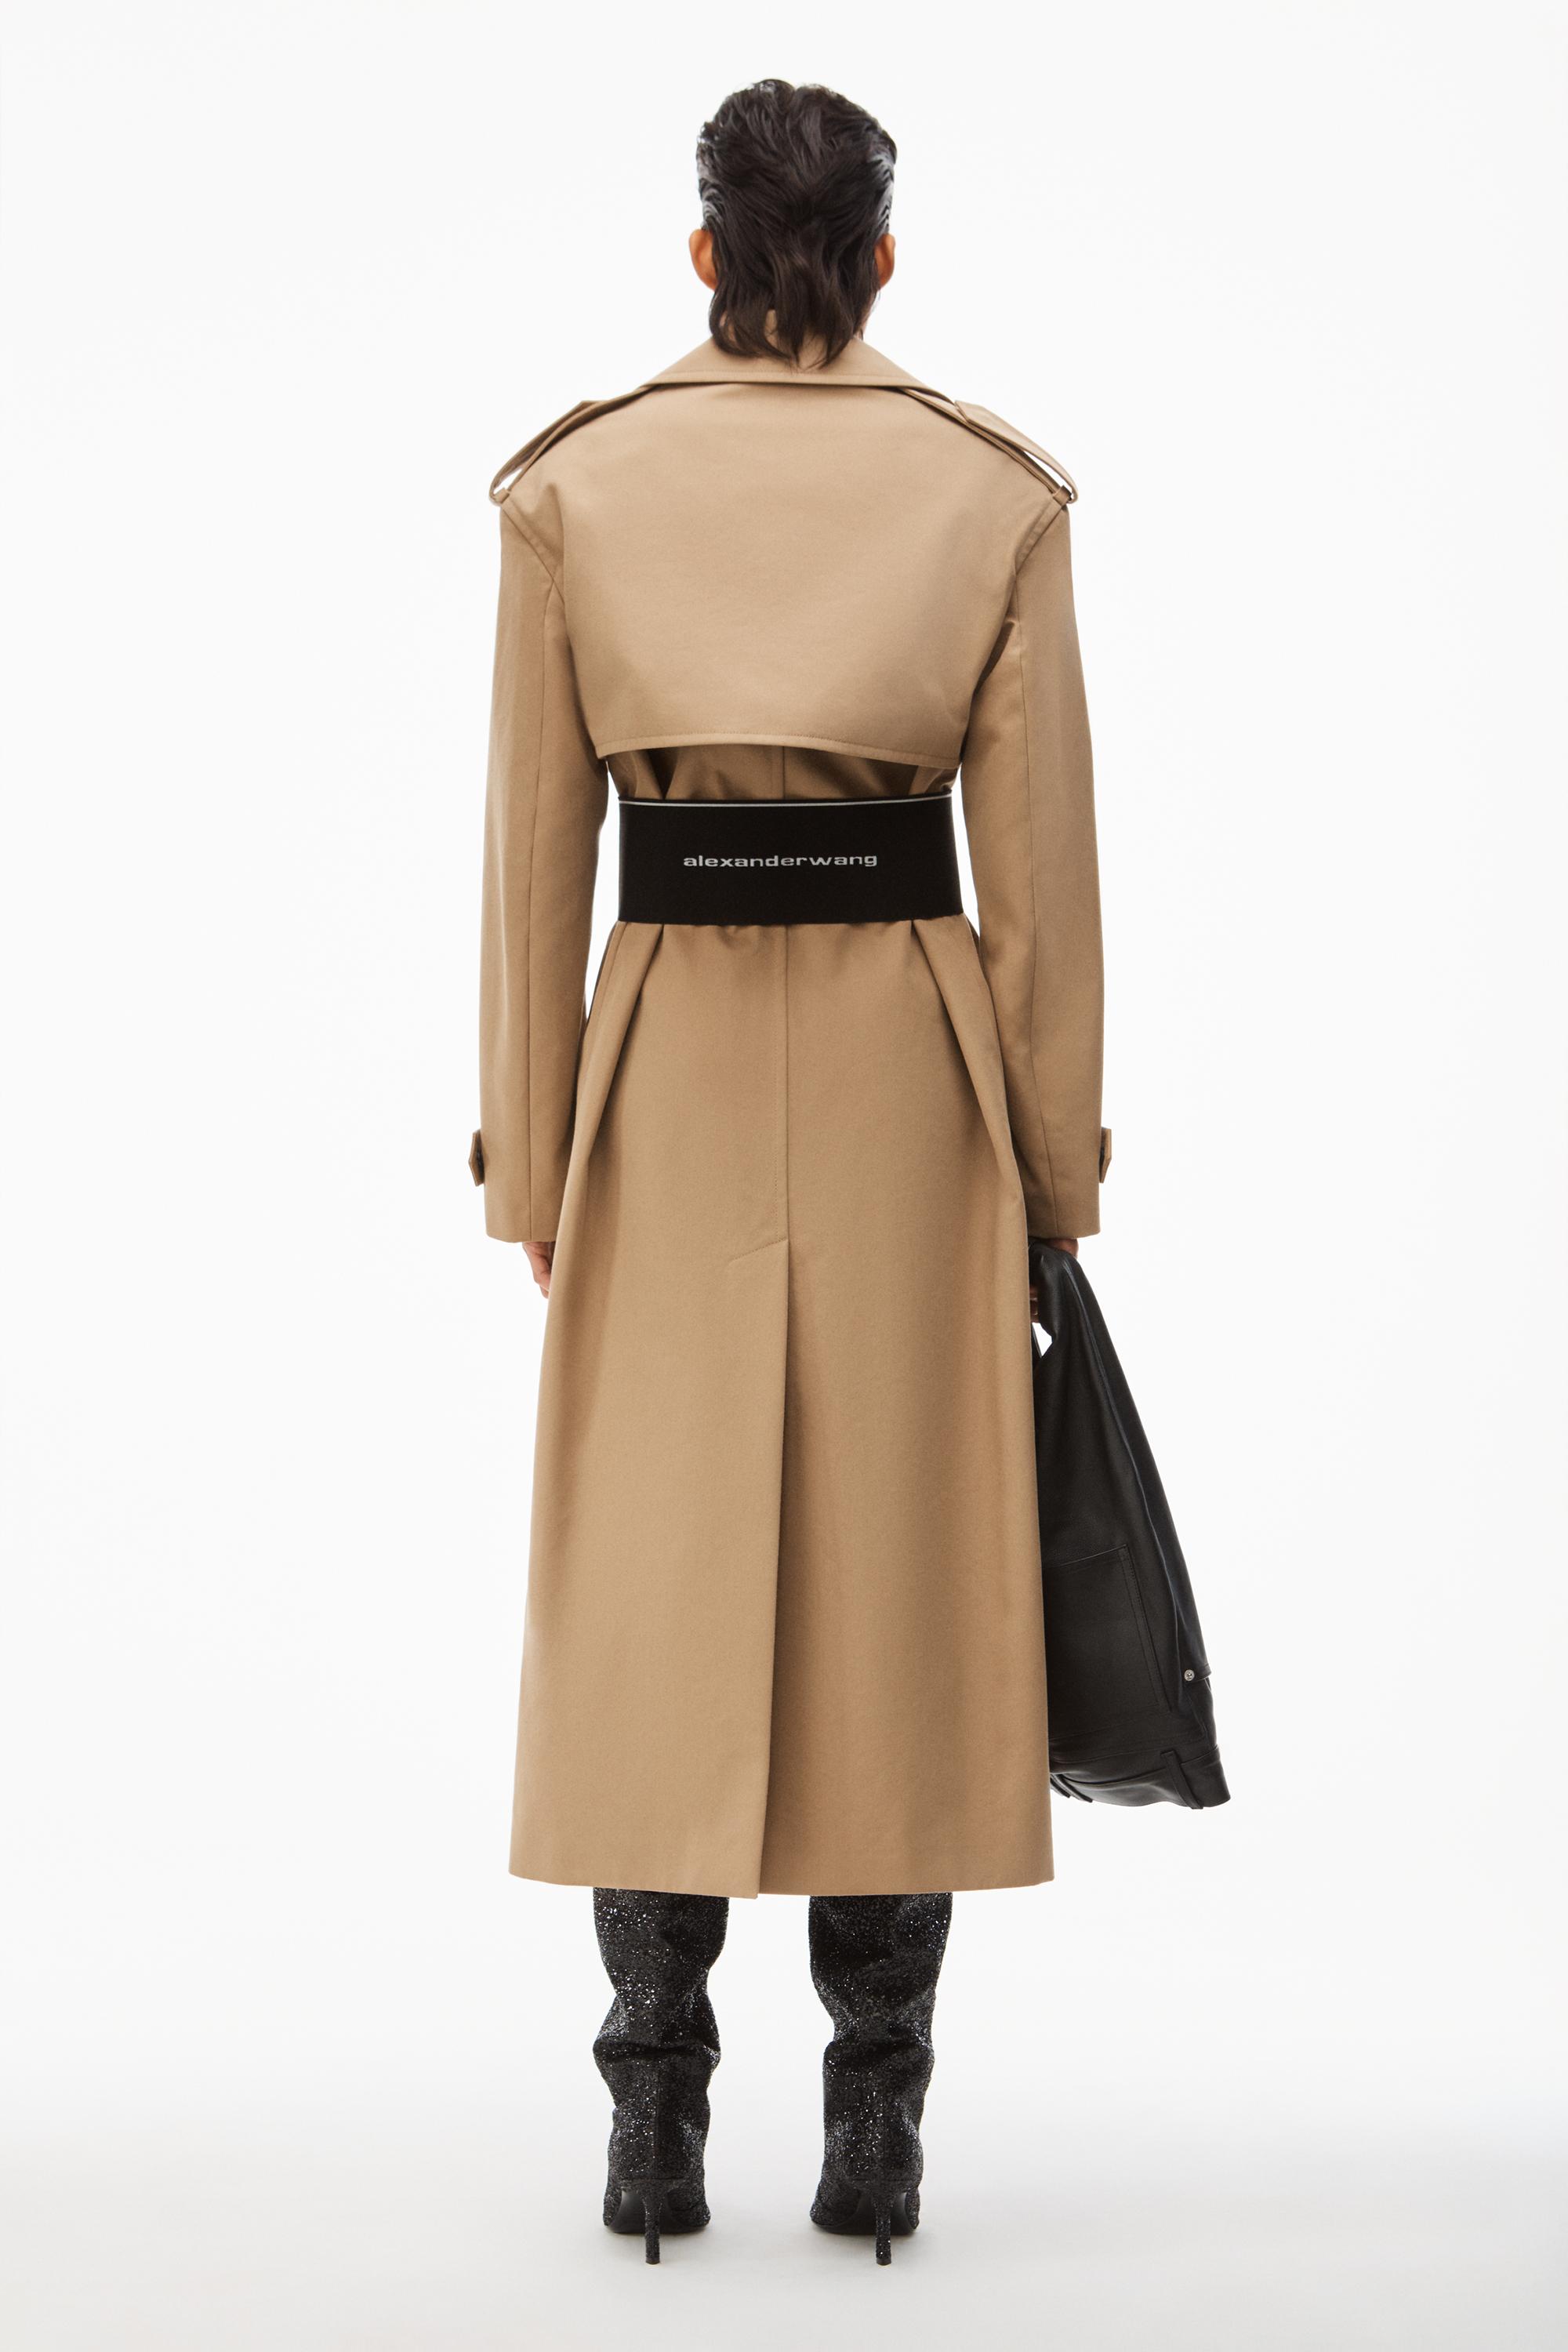 Alexander Wang Logo Trench Coat In Cotton Tailoring in Natural | Lyst